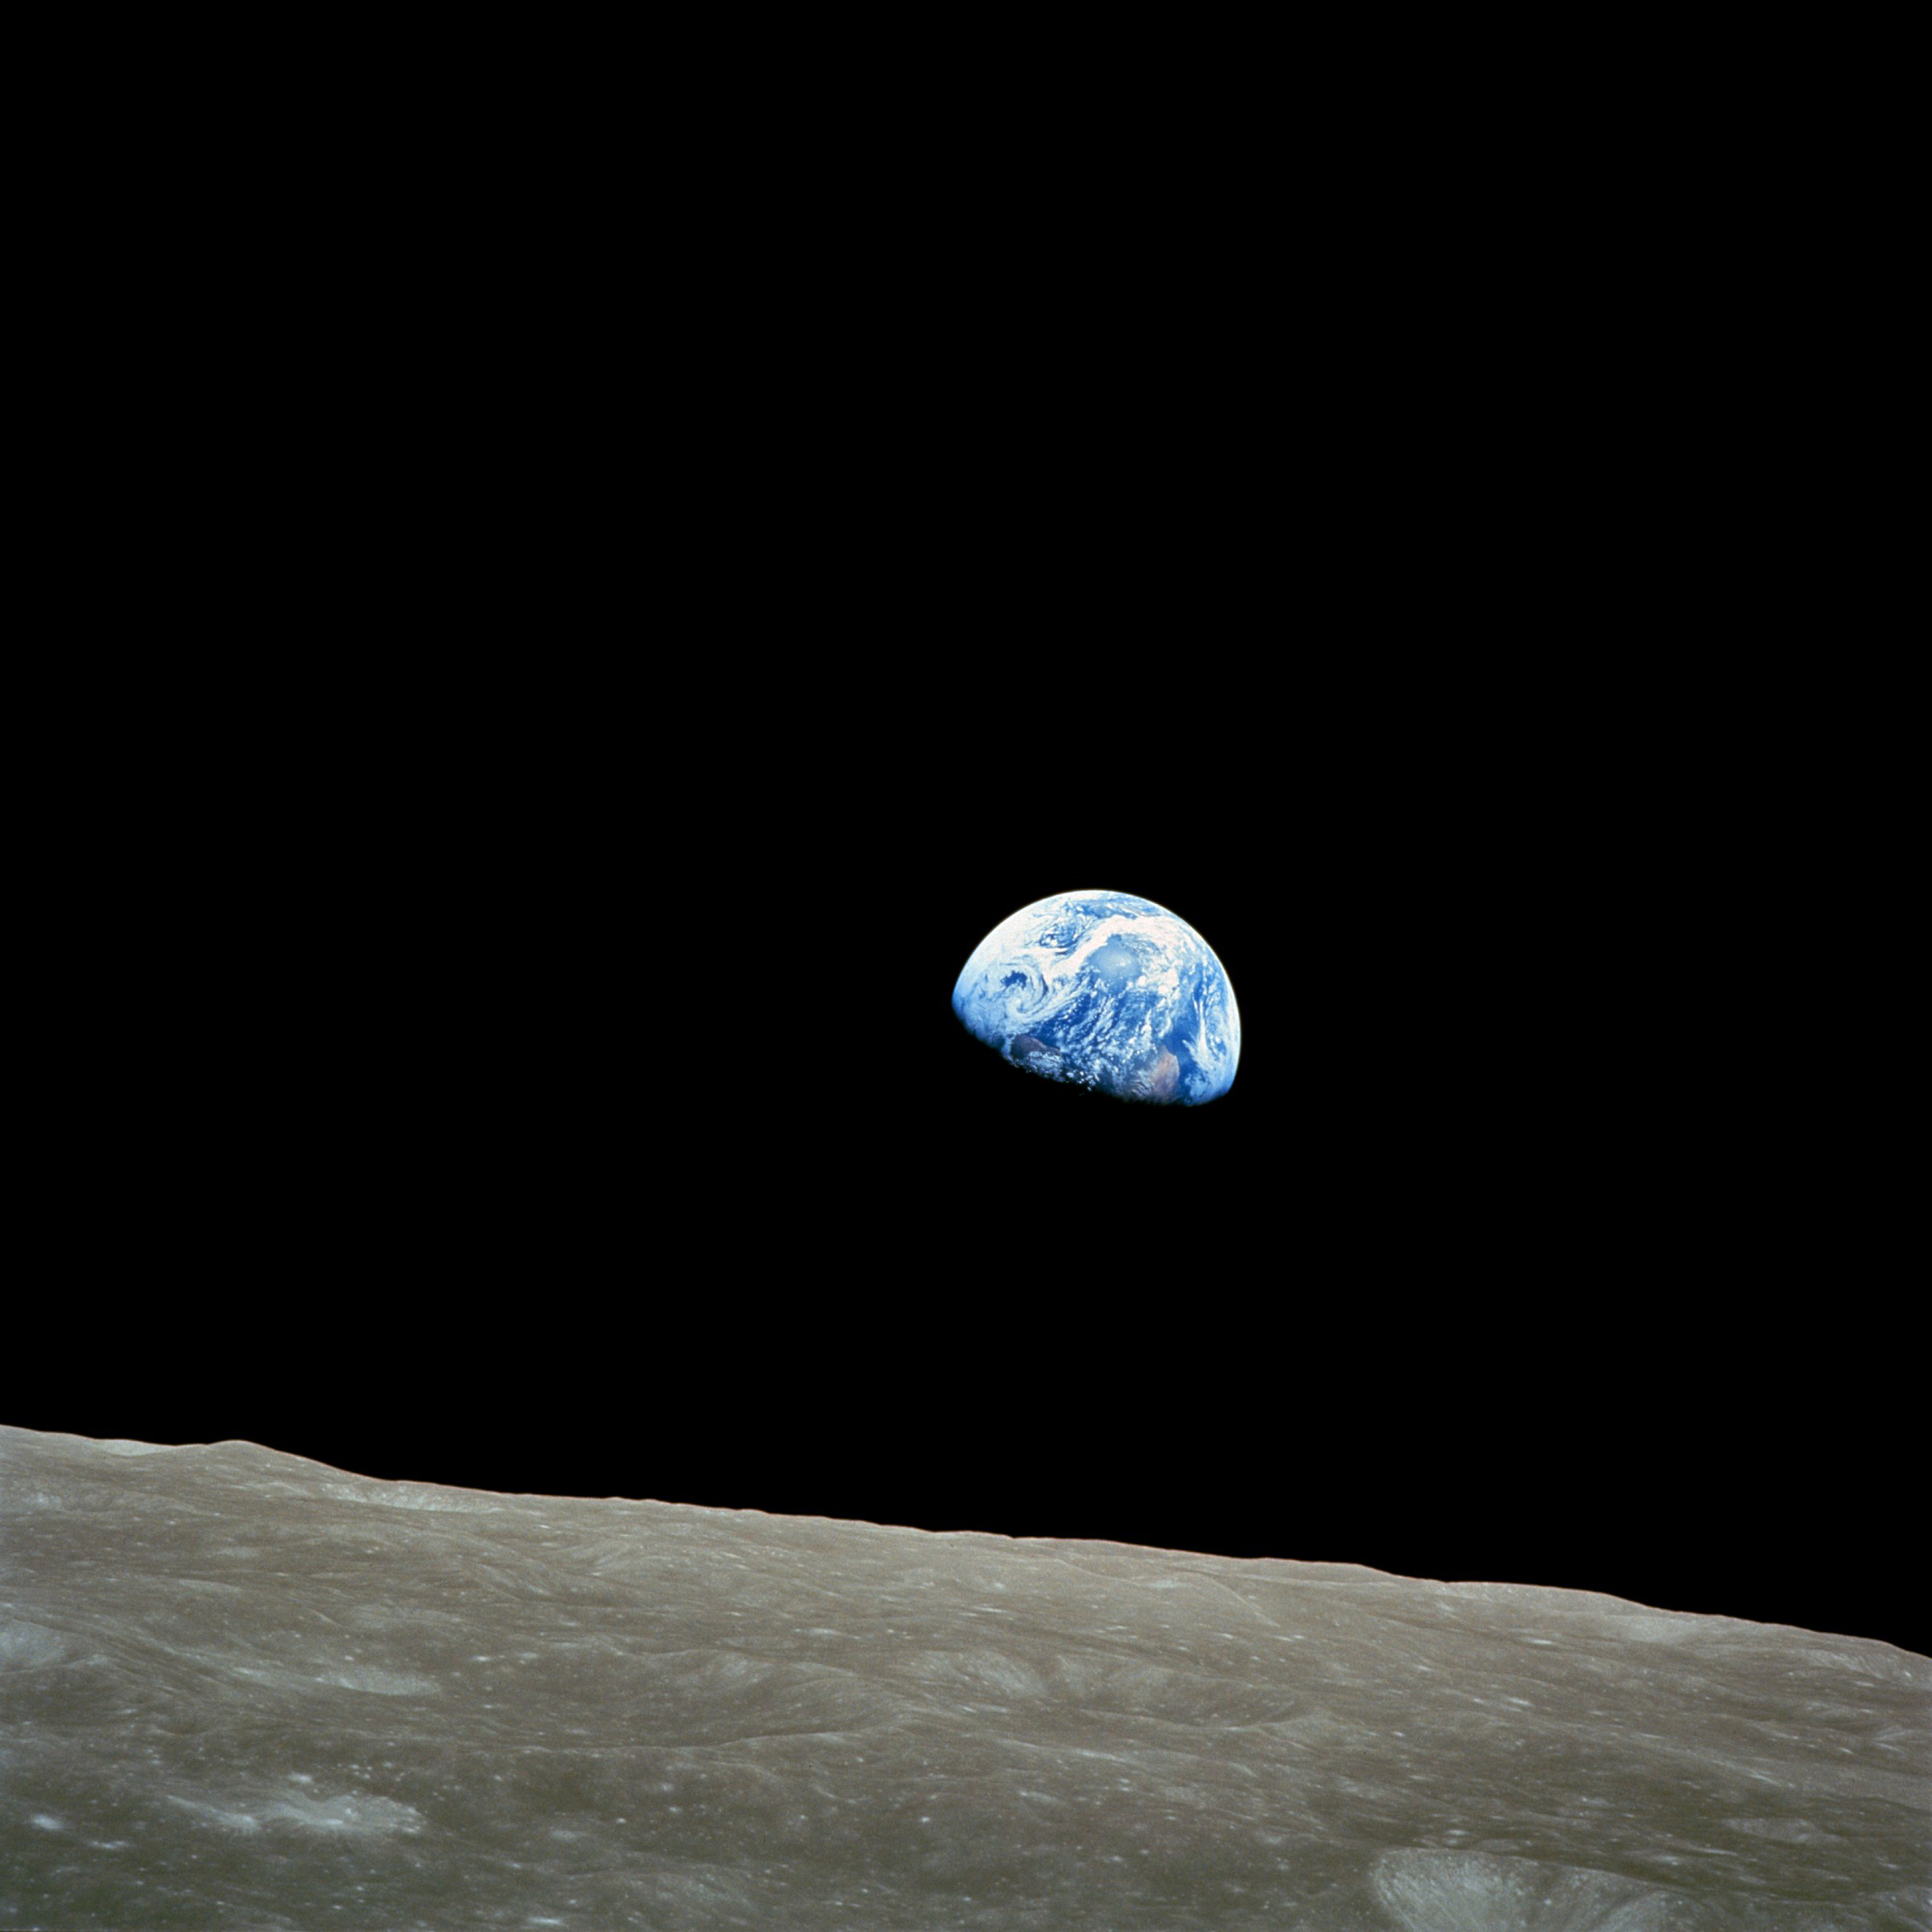 The distant blue Earth is seen above the Moon's limb, in this handout picture taken by the Apollo 8 crew forty-five years ago, on December 24, 1968, courtesy of NASA. Frank Borman, James Lovell, and William Anders were launched atop a Saturn V rocket on December 21, 1968 circled the Moon ten times in their command module, and returned to Earth on December 27. The Apollo 8 mission's impressive list of firsts includes: the first humans to journey to the Earth's Moon, the first to fly using the Saturn V rocket, and the first to photograph the Earth from deep space. REUTERS/NASA/Handout via Reuters 